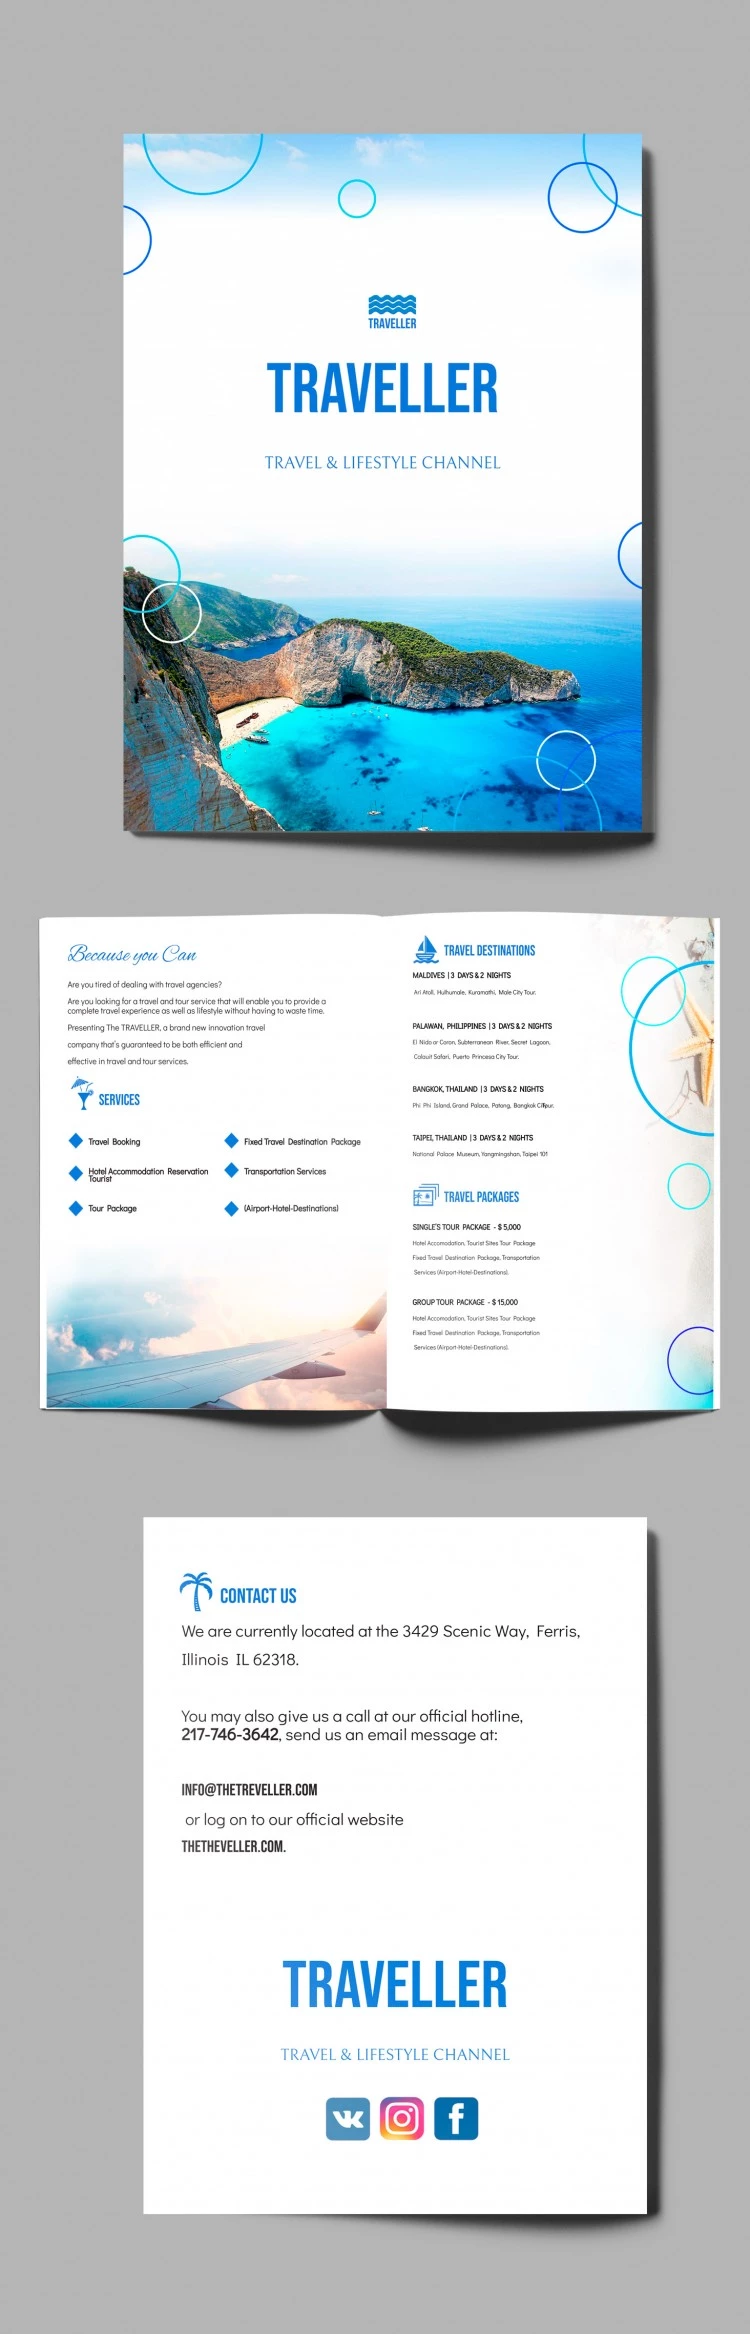 Travel Booklet - free Google Docs Template - 10061801